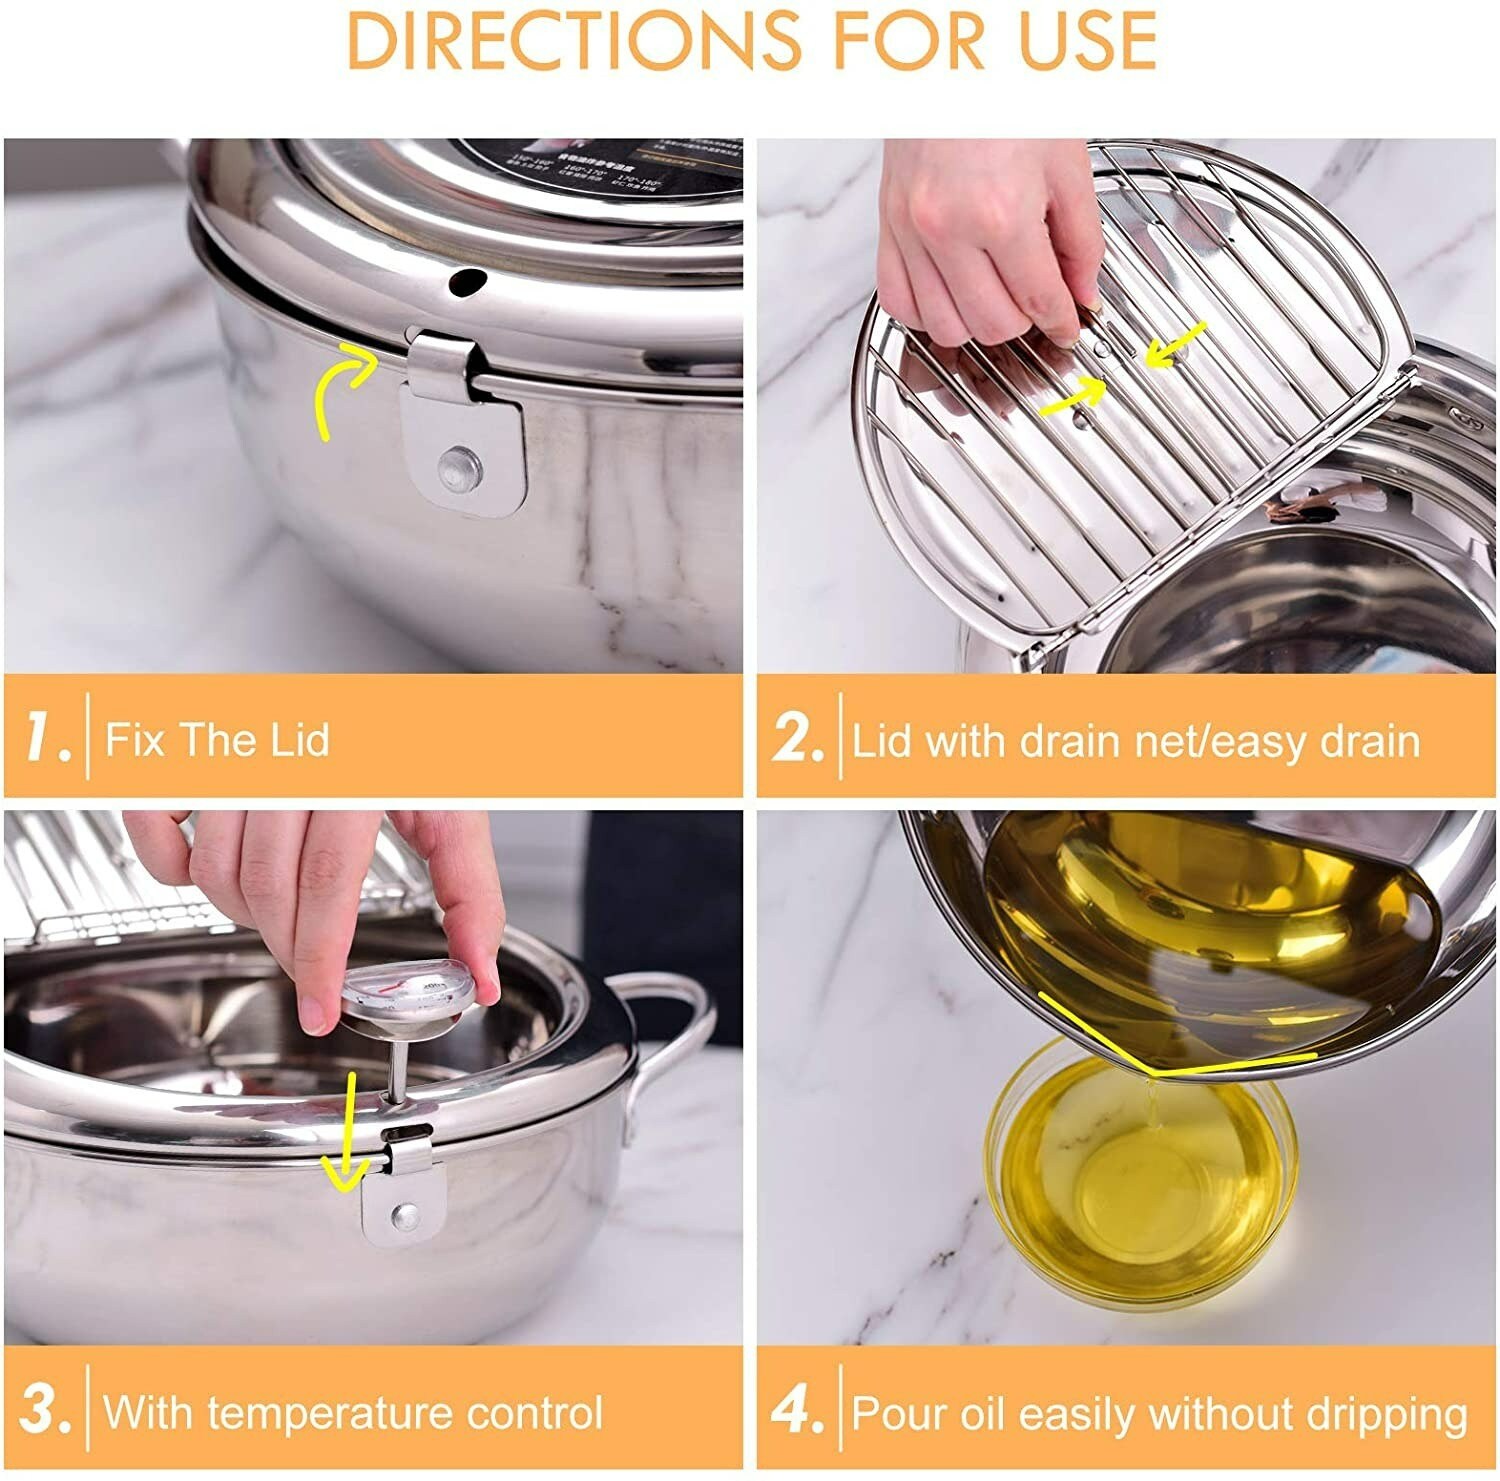 Stainless Steel Deep Frying Pot with a Thermometer and Lid Kitchen